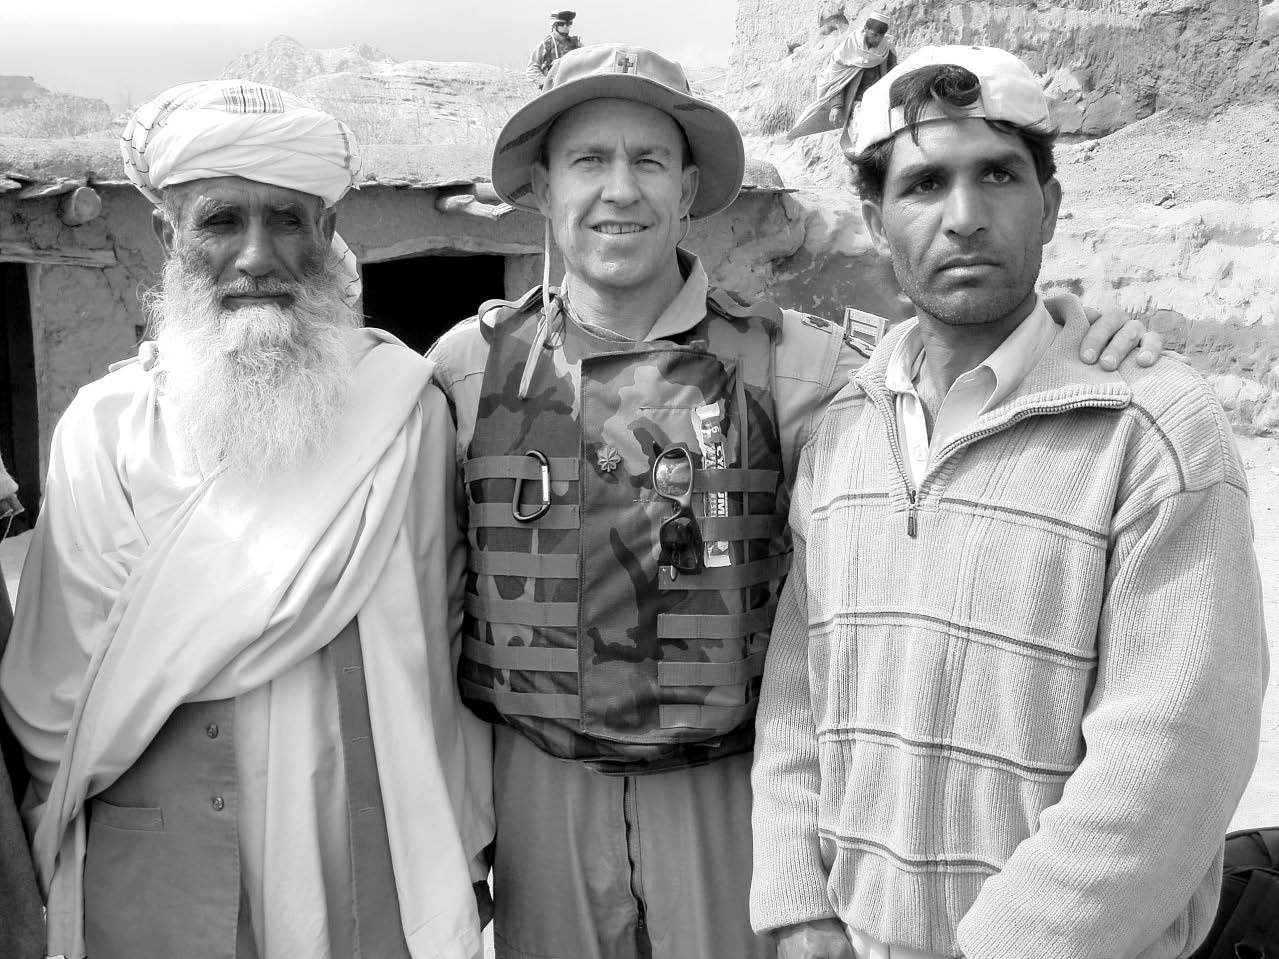 Latter-day Saint chaplain Mark Allison (center) is shown with an Afghan father and son near the border of Afghanistan and Pakistan. Courtesy of Mark Allison.